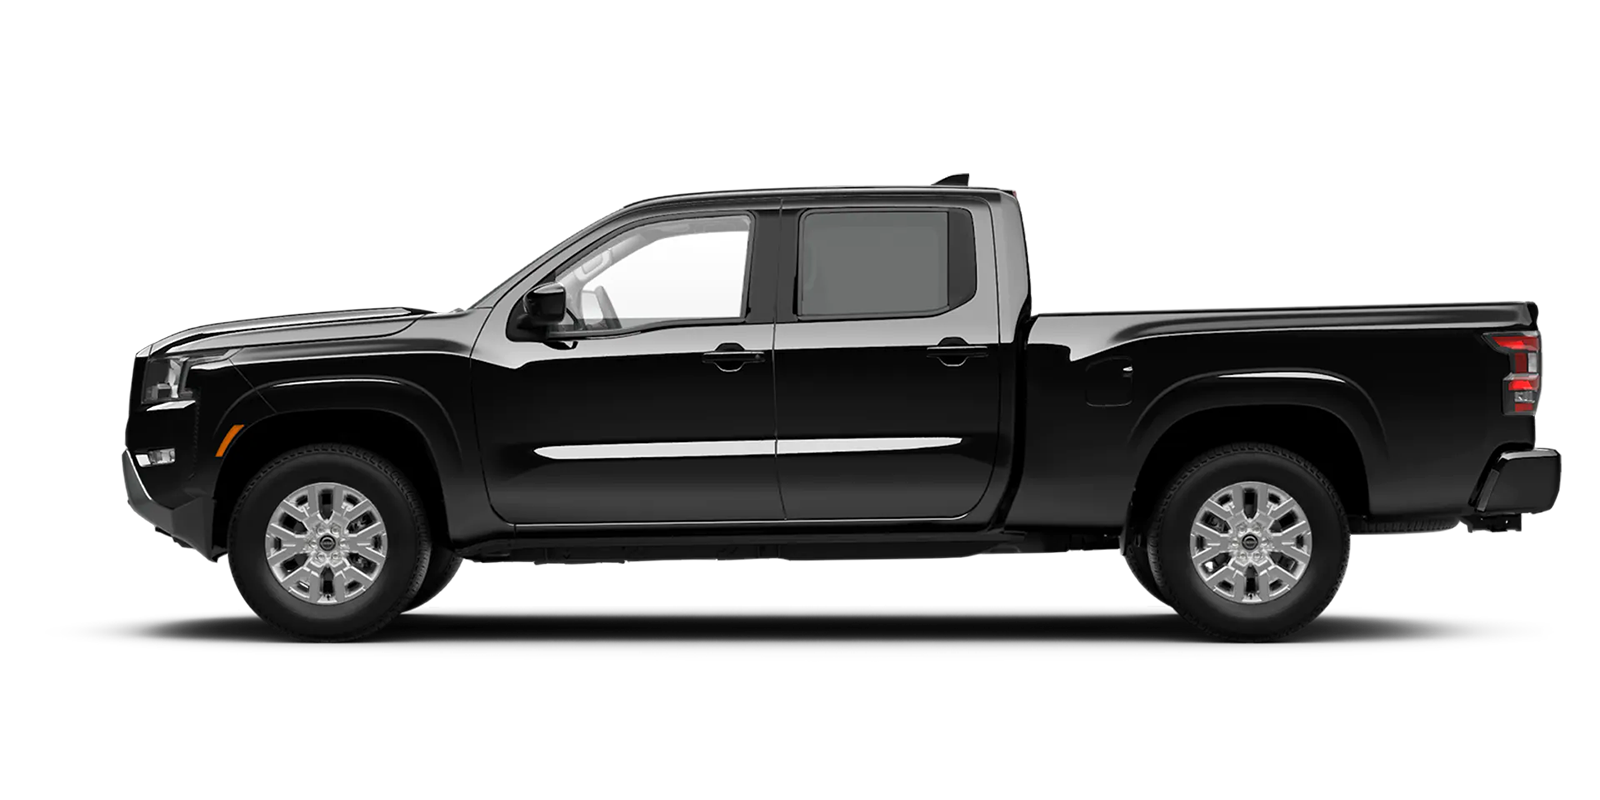 2022 Frontier Crew Cab Long Bed SV 4x4 in Super Black | Carlock Nissan Of Tupelo in Tupelo MS